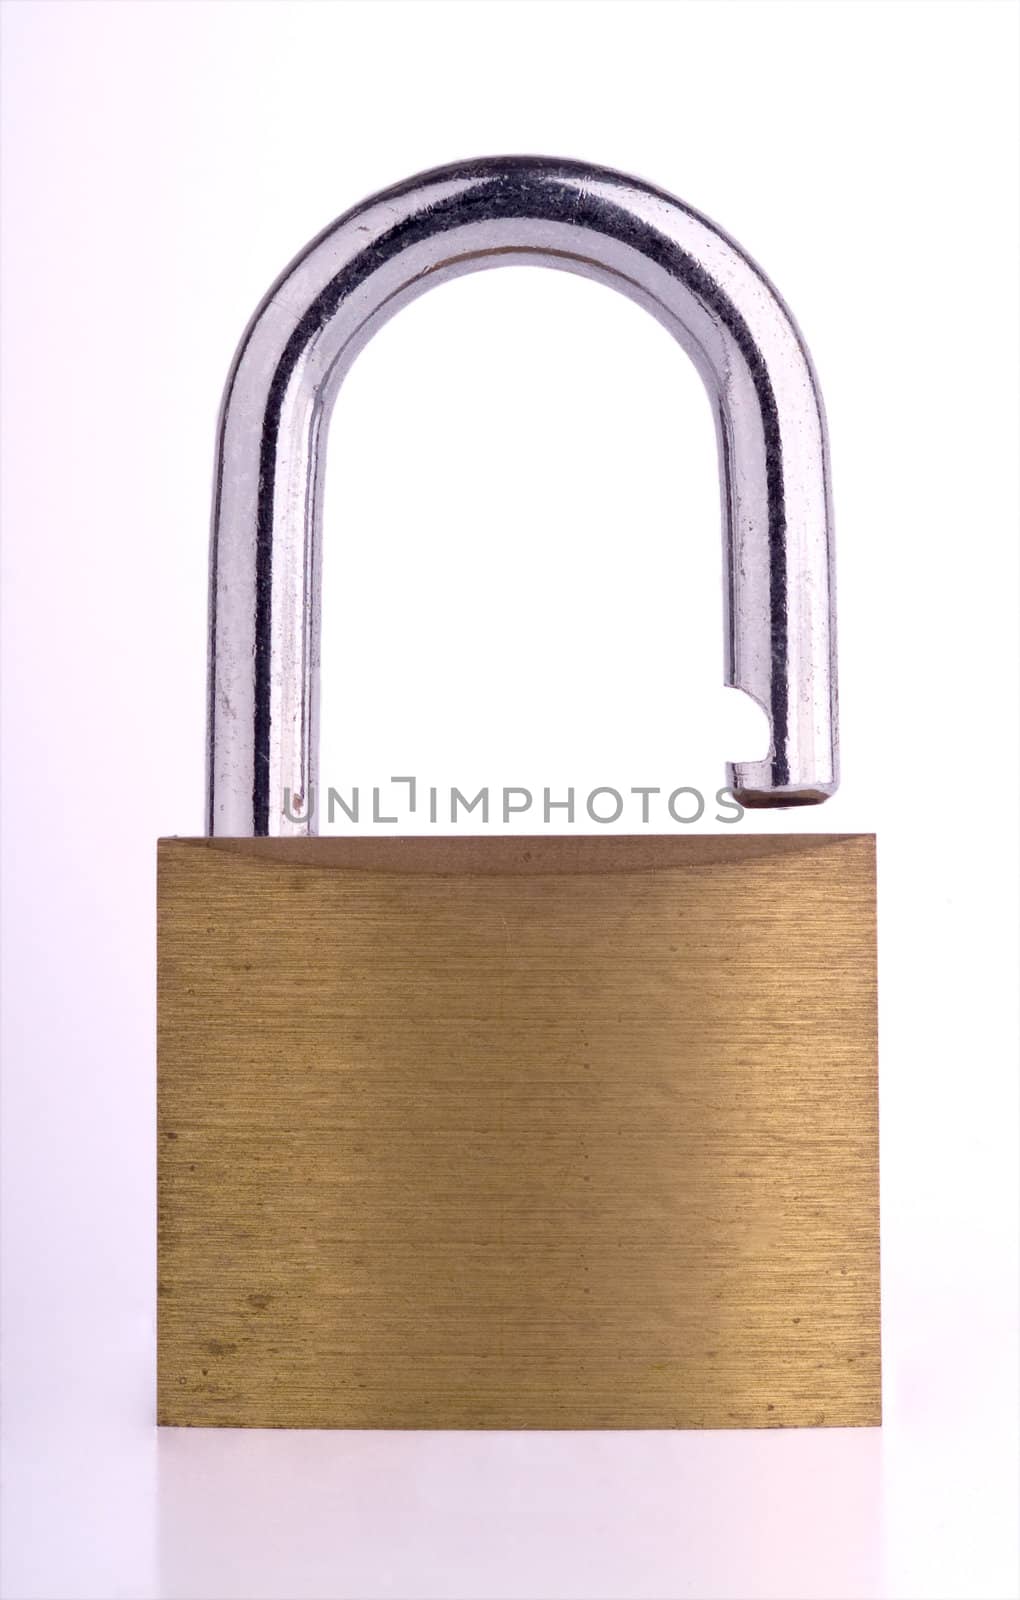 Old open brass and nickel padlock